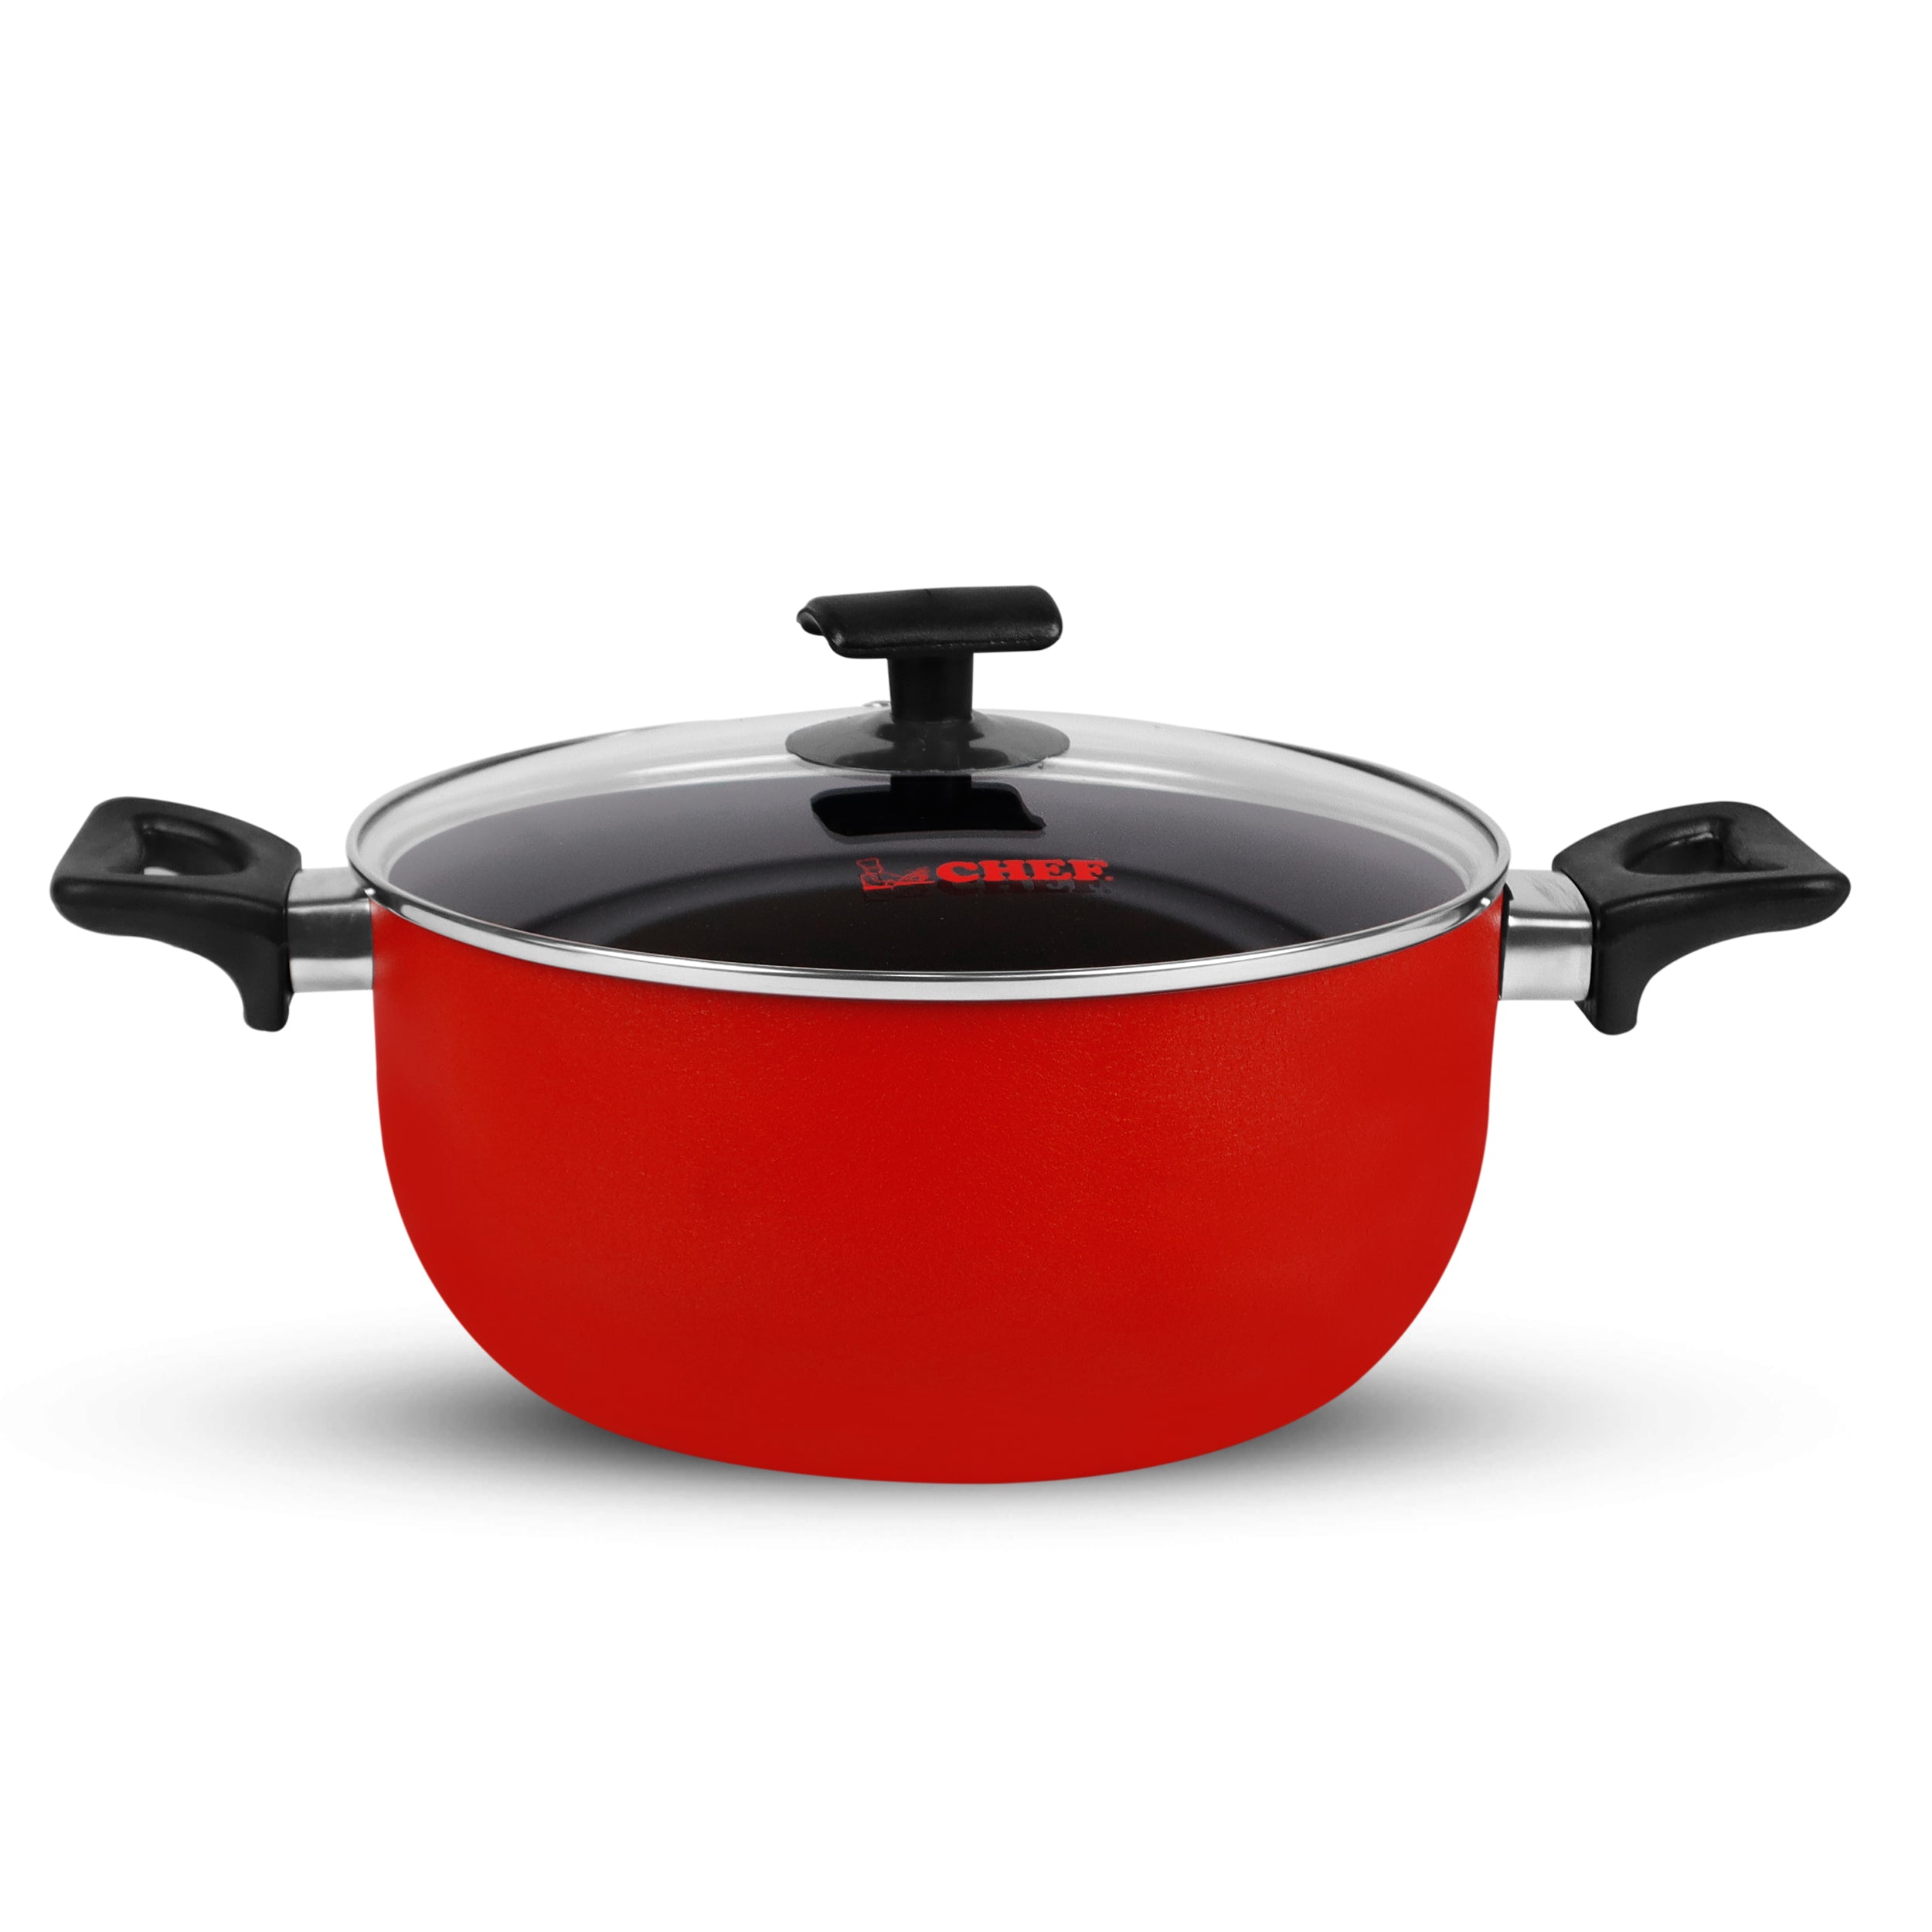 best non stick casserole cooking pan with lid red color - majestic chef cookware